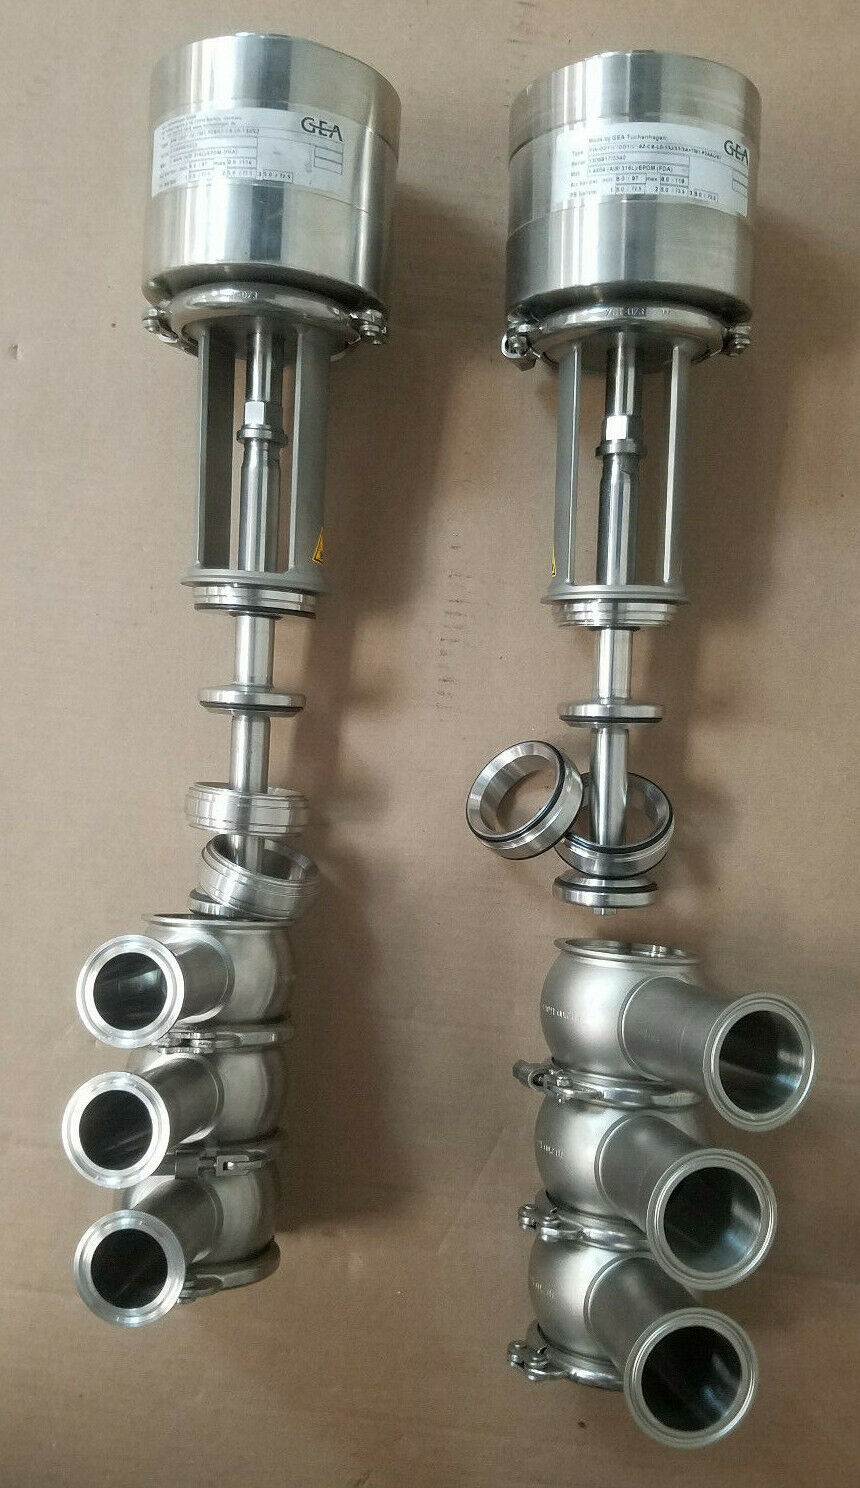 2 GEA TUCHENHAGEN STAINLESS STEEL 3 PORT VALVES 2 INCH AND 1 1/2 INCH TRI CLAMP GEA Does Not Apply